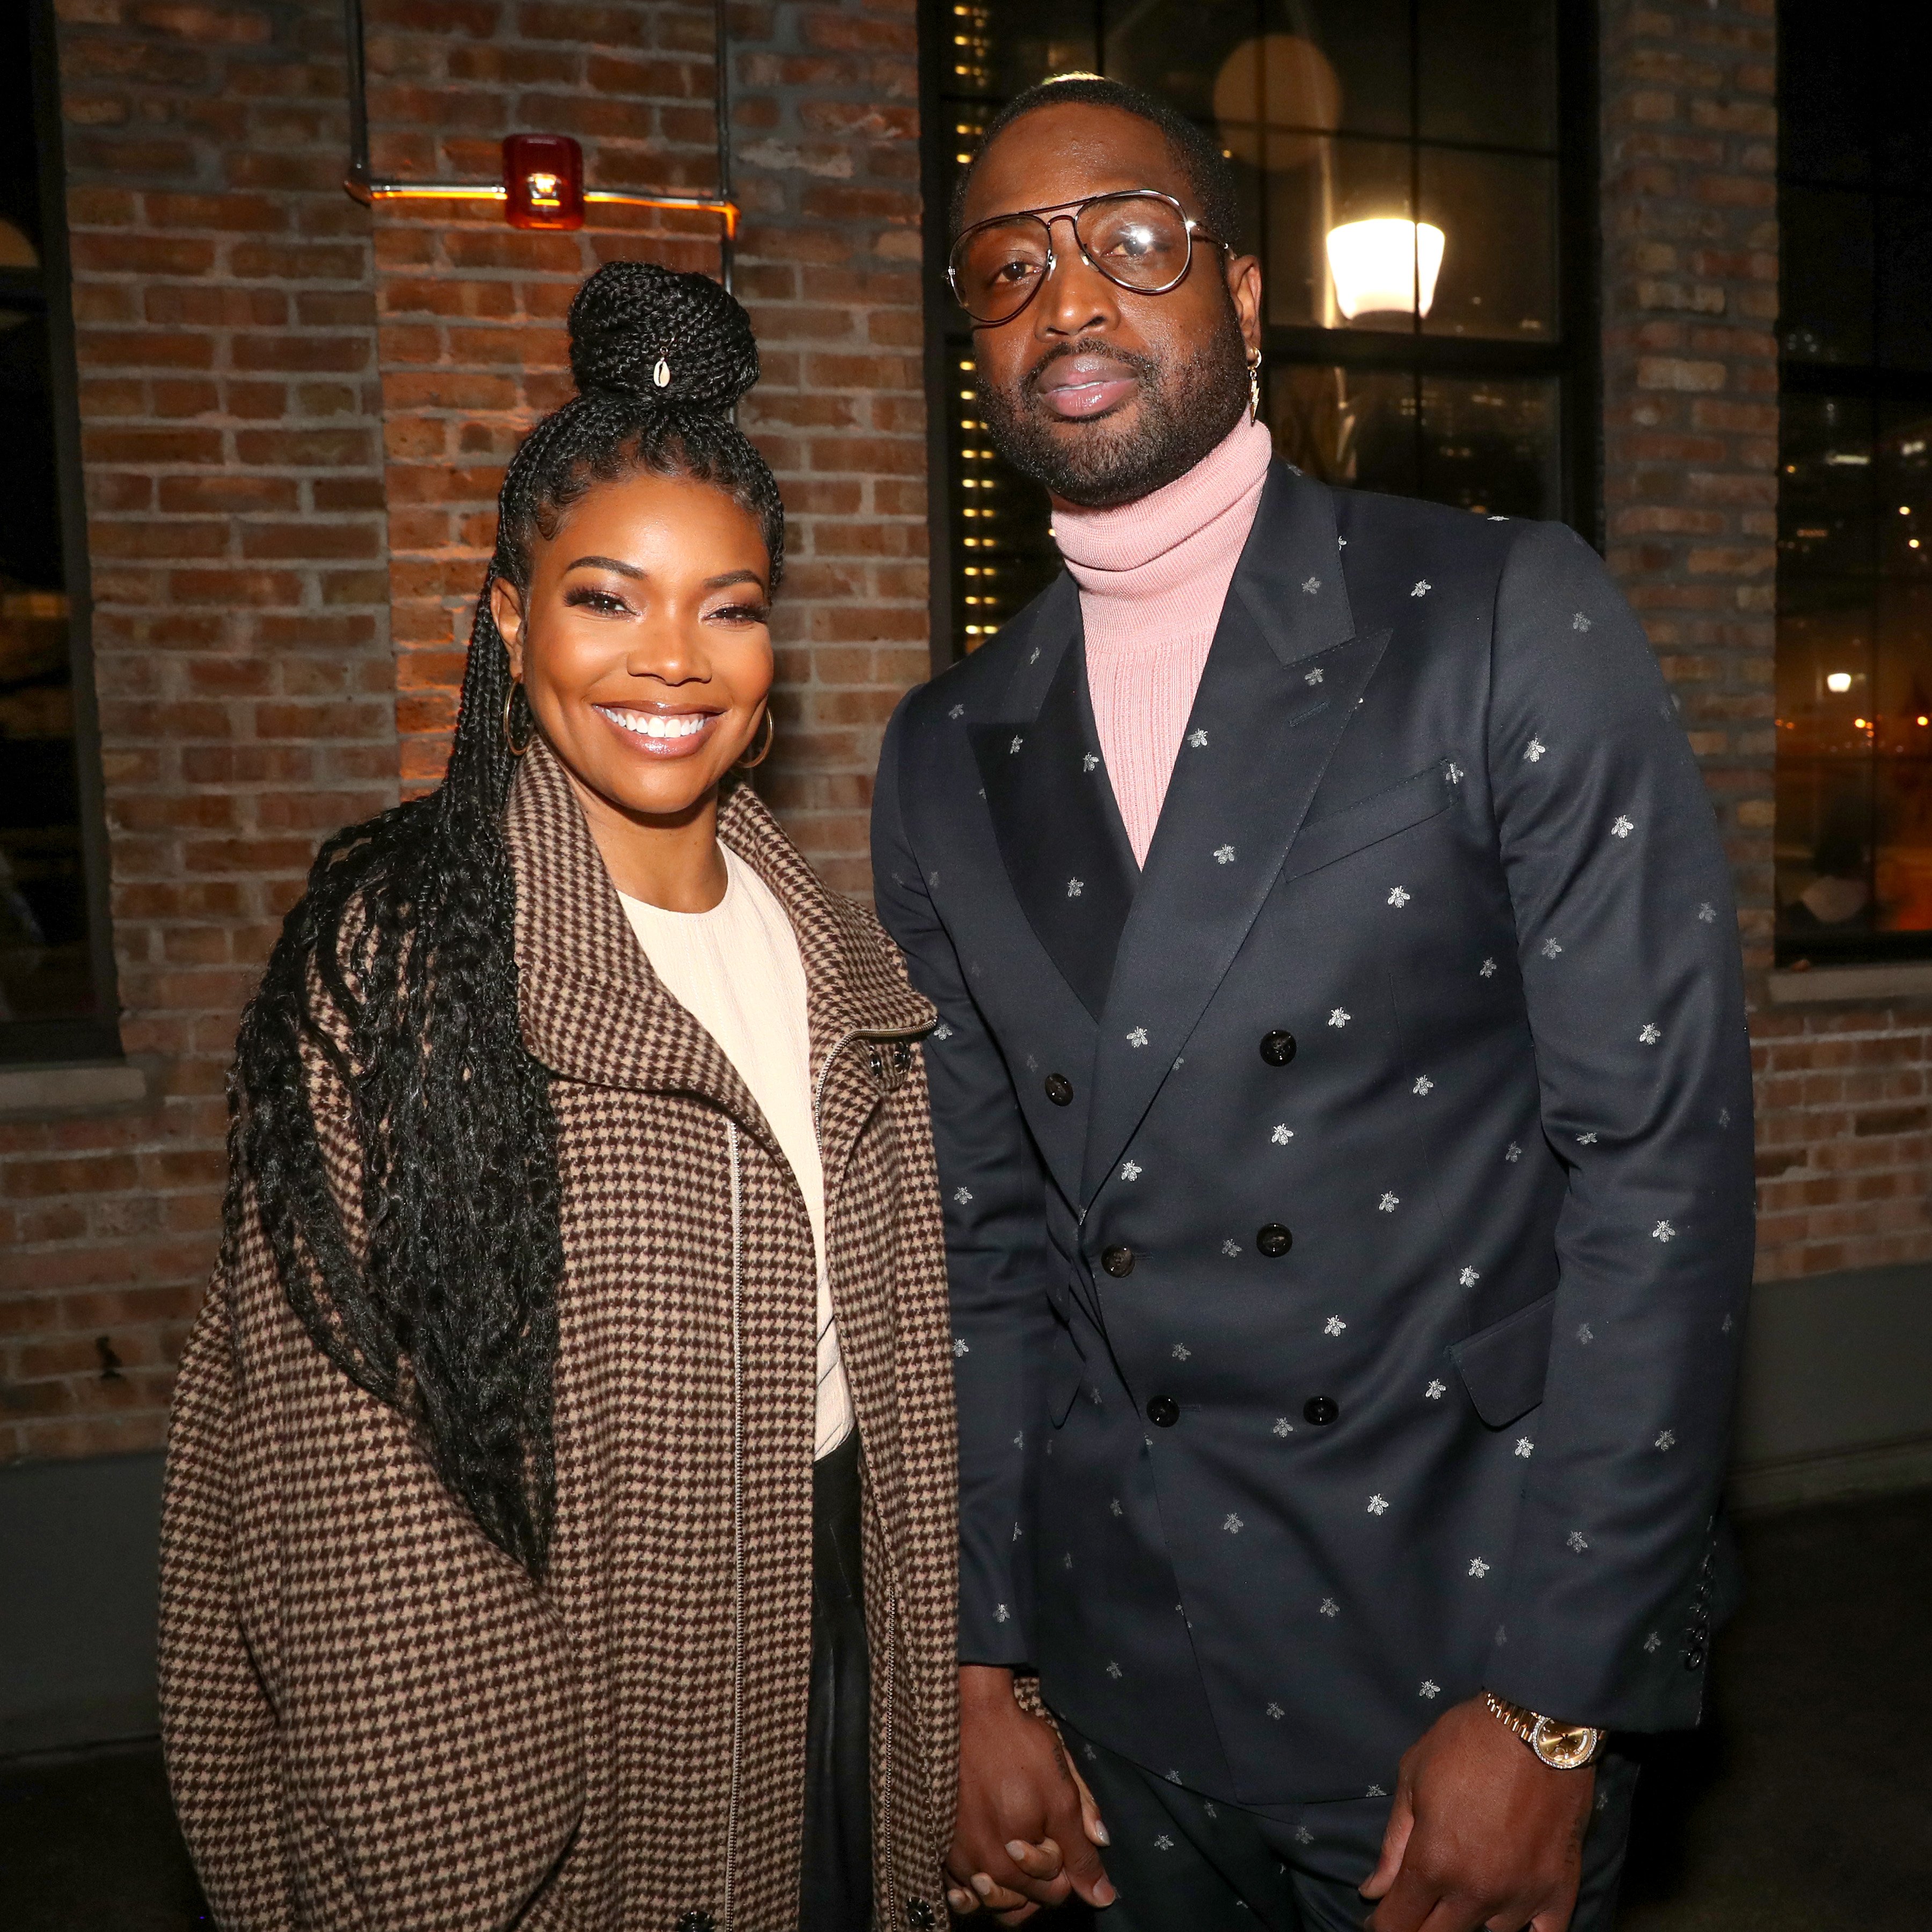 Gabrielle Union and Dwyane Wade attend Stance Spades at the NBA All-Star 2020 on February 15, 2020. | Photo: Getty Images